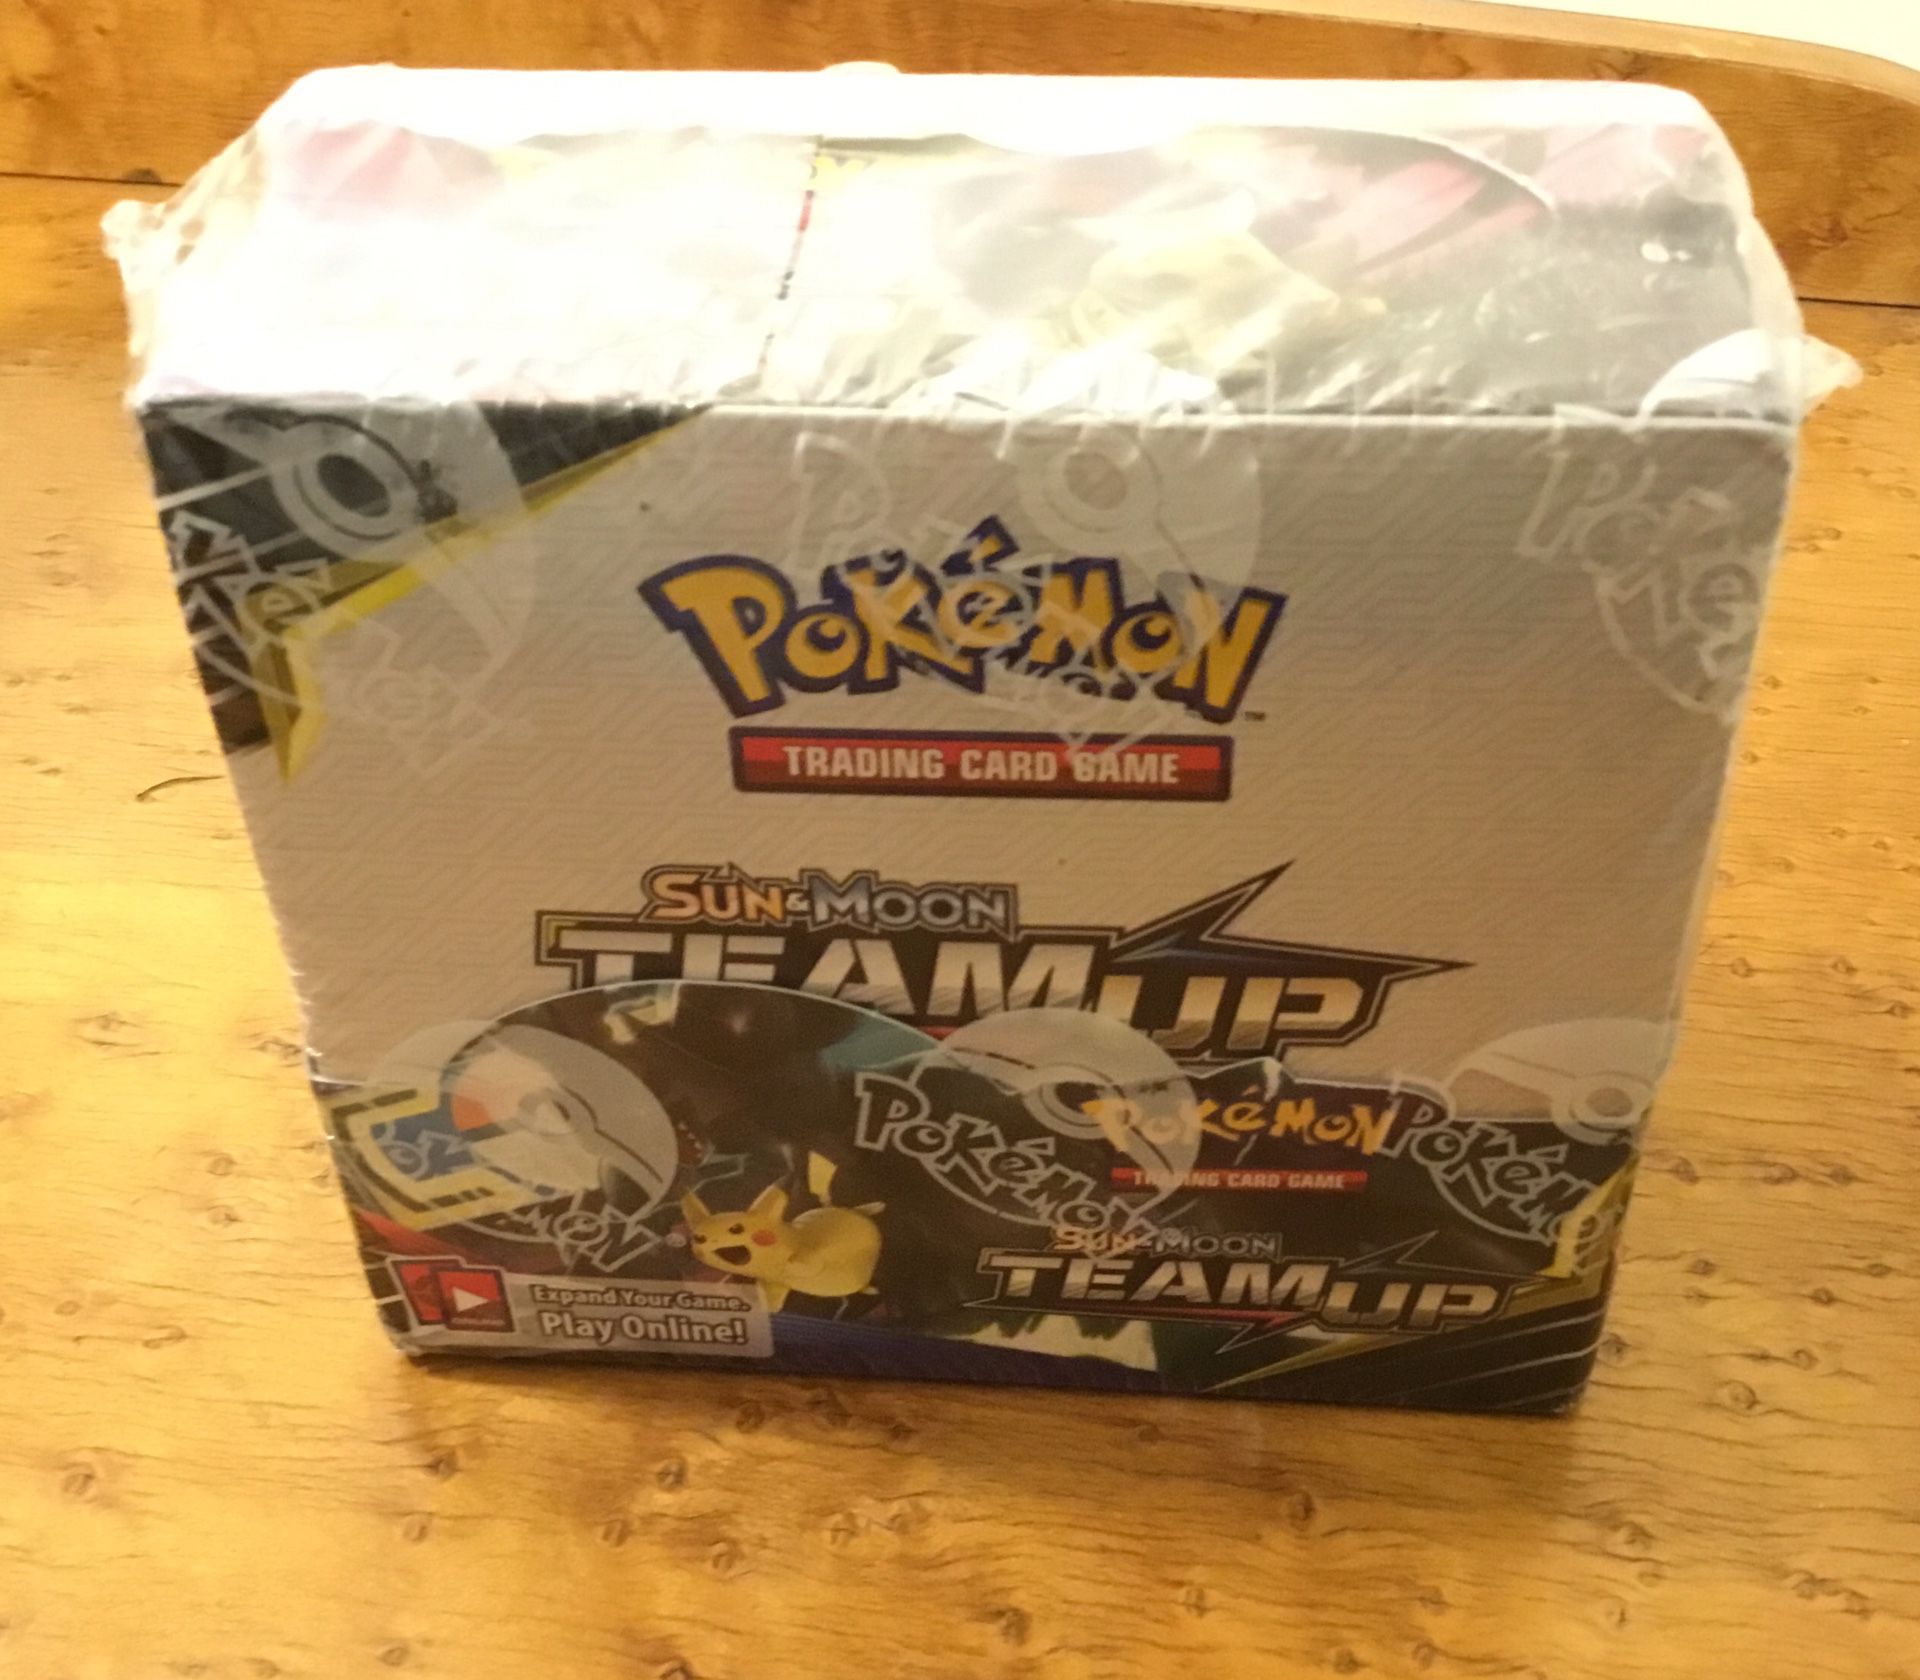 Pokémon booster box 36 unopened packs of sun and moon Team Up